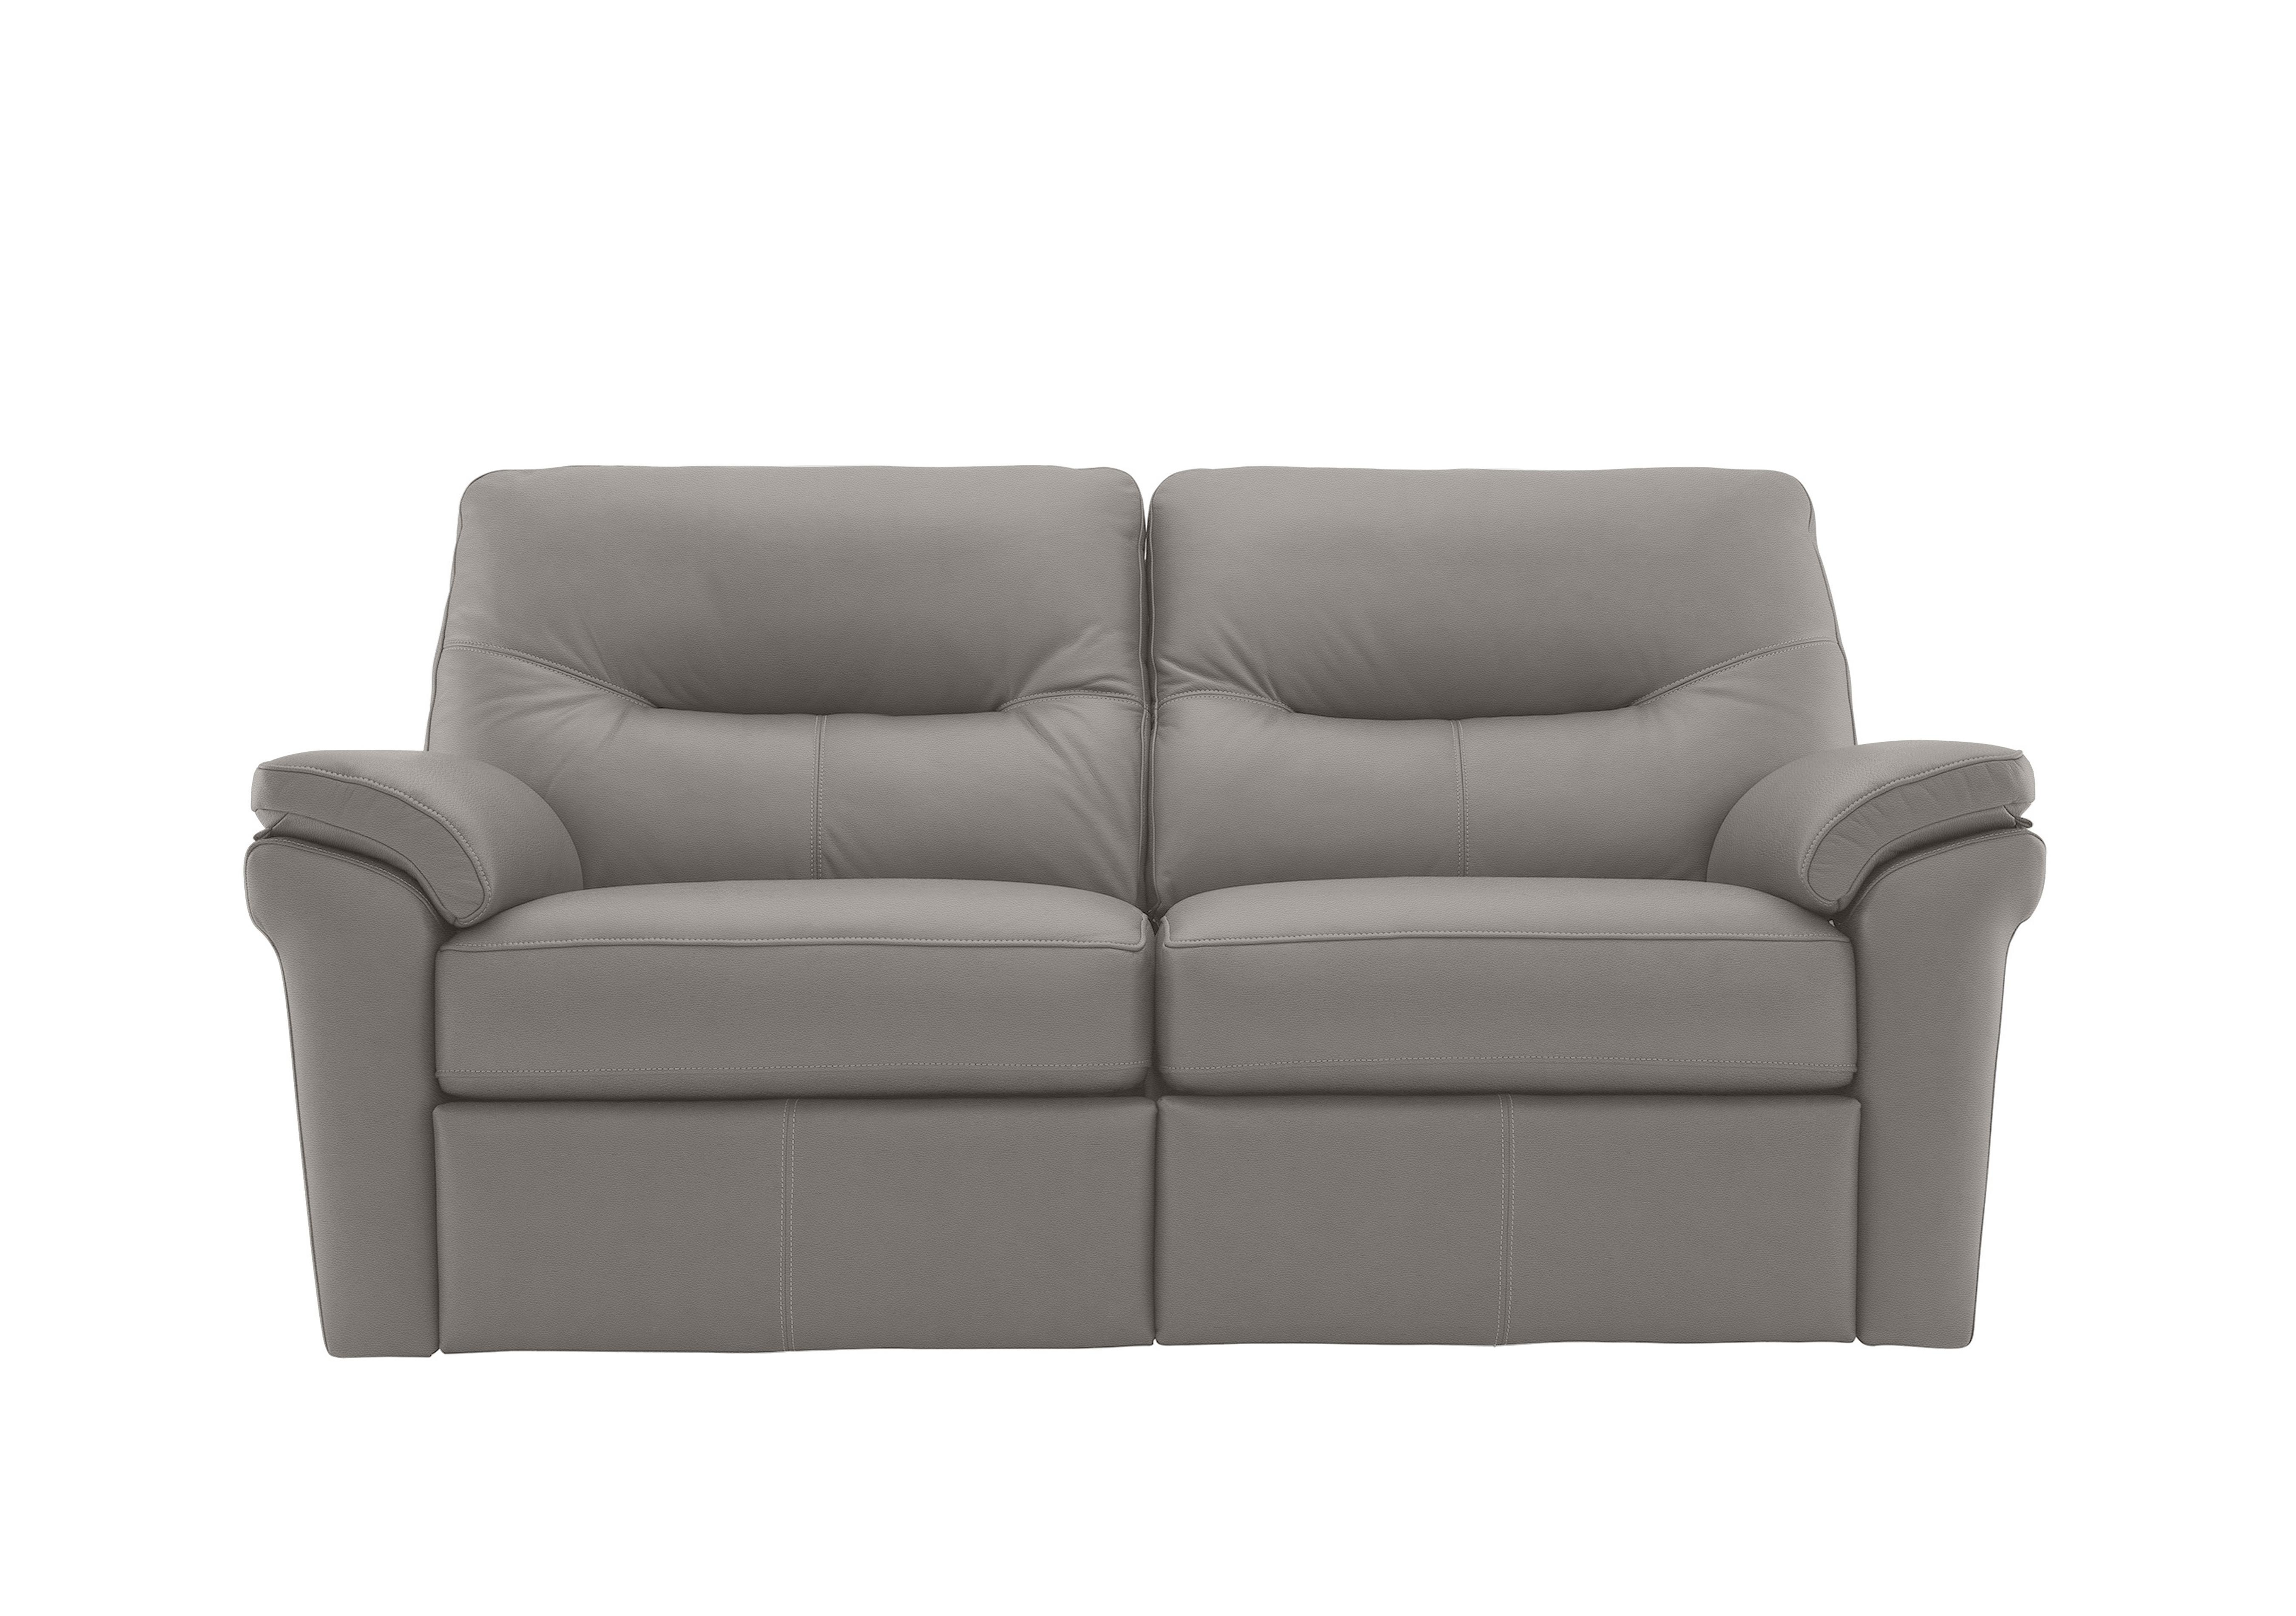 Seattle 2.5 Seater Leather Sofa in L842 Cambridge Grey on Furniture Village